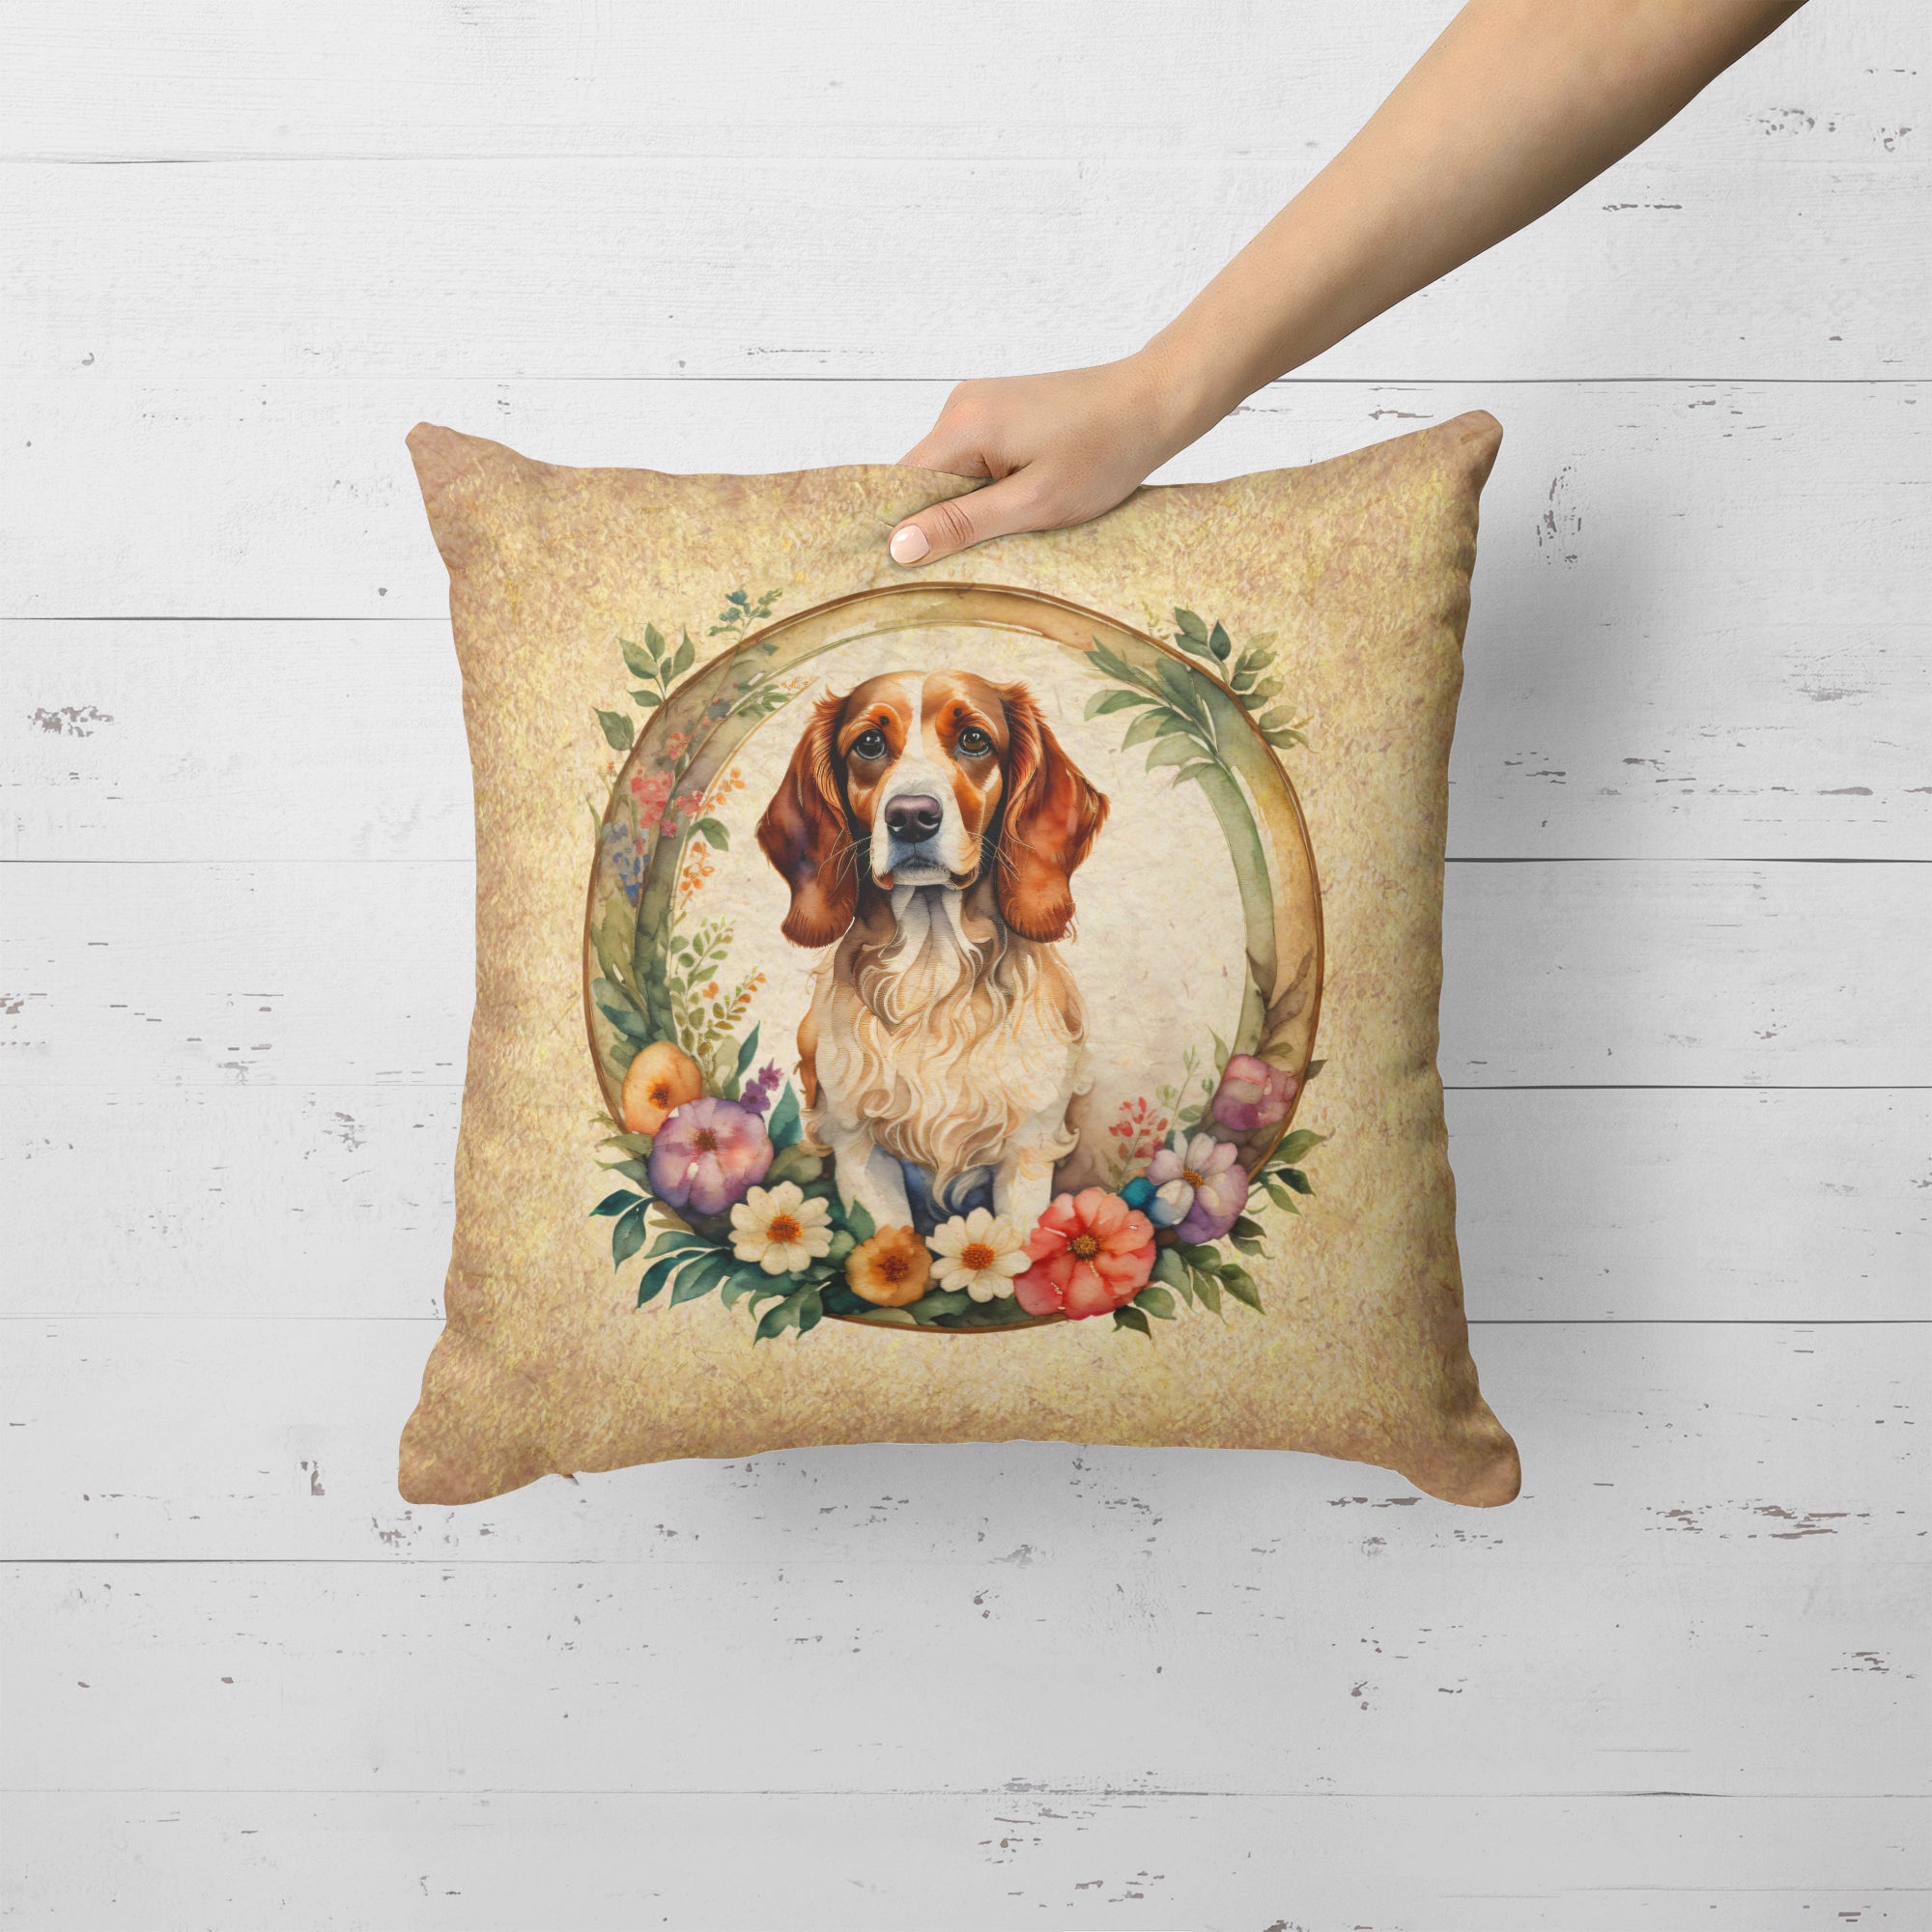 Buy this Brittany Spaniel and Flowers Fabric Decorative Pillow